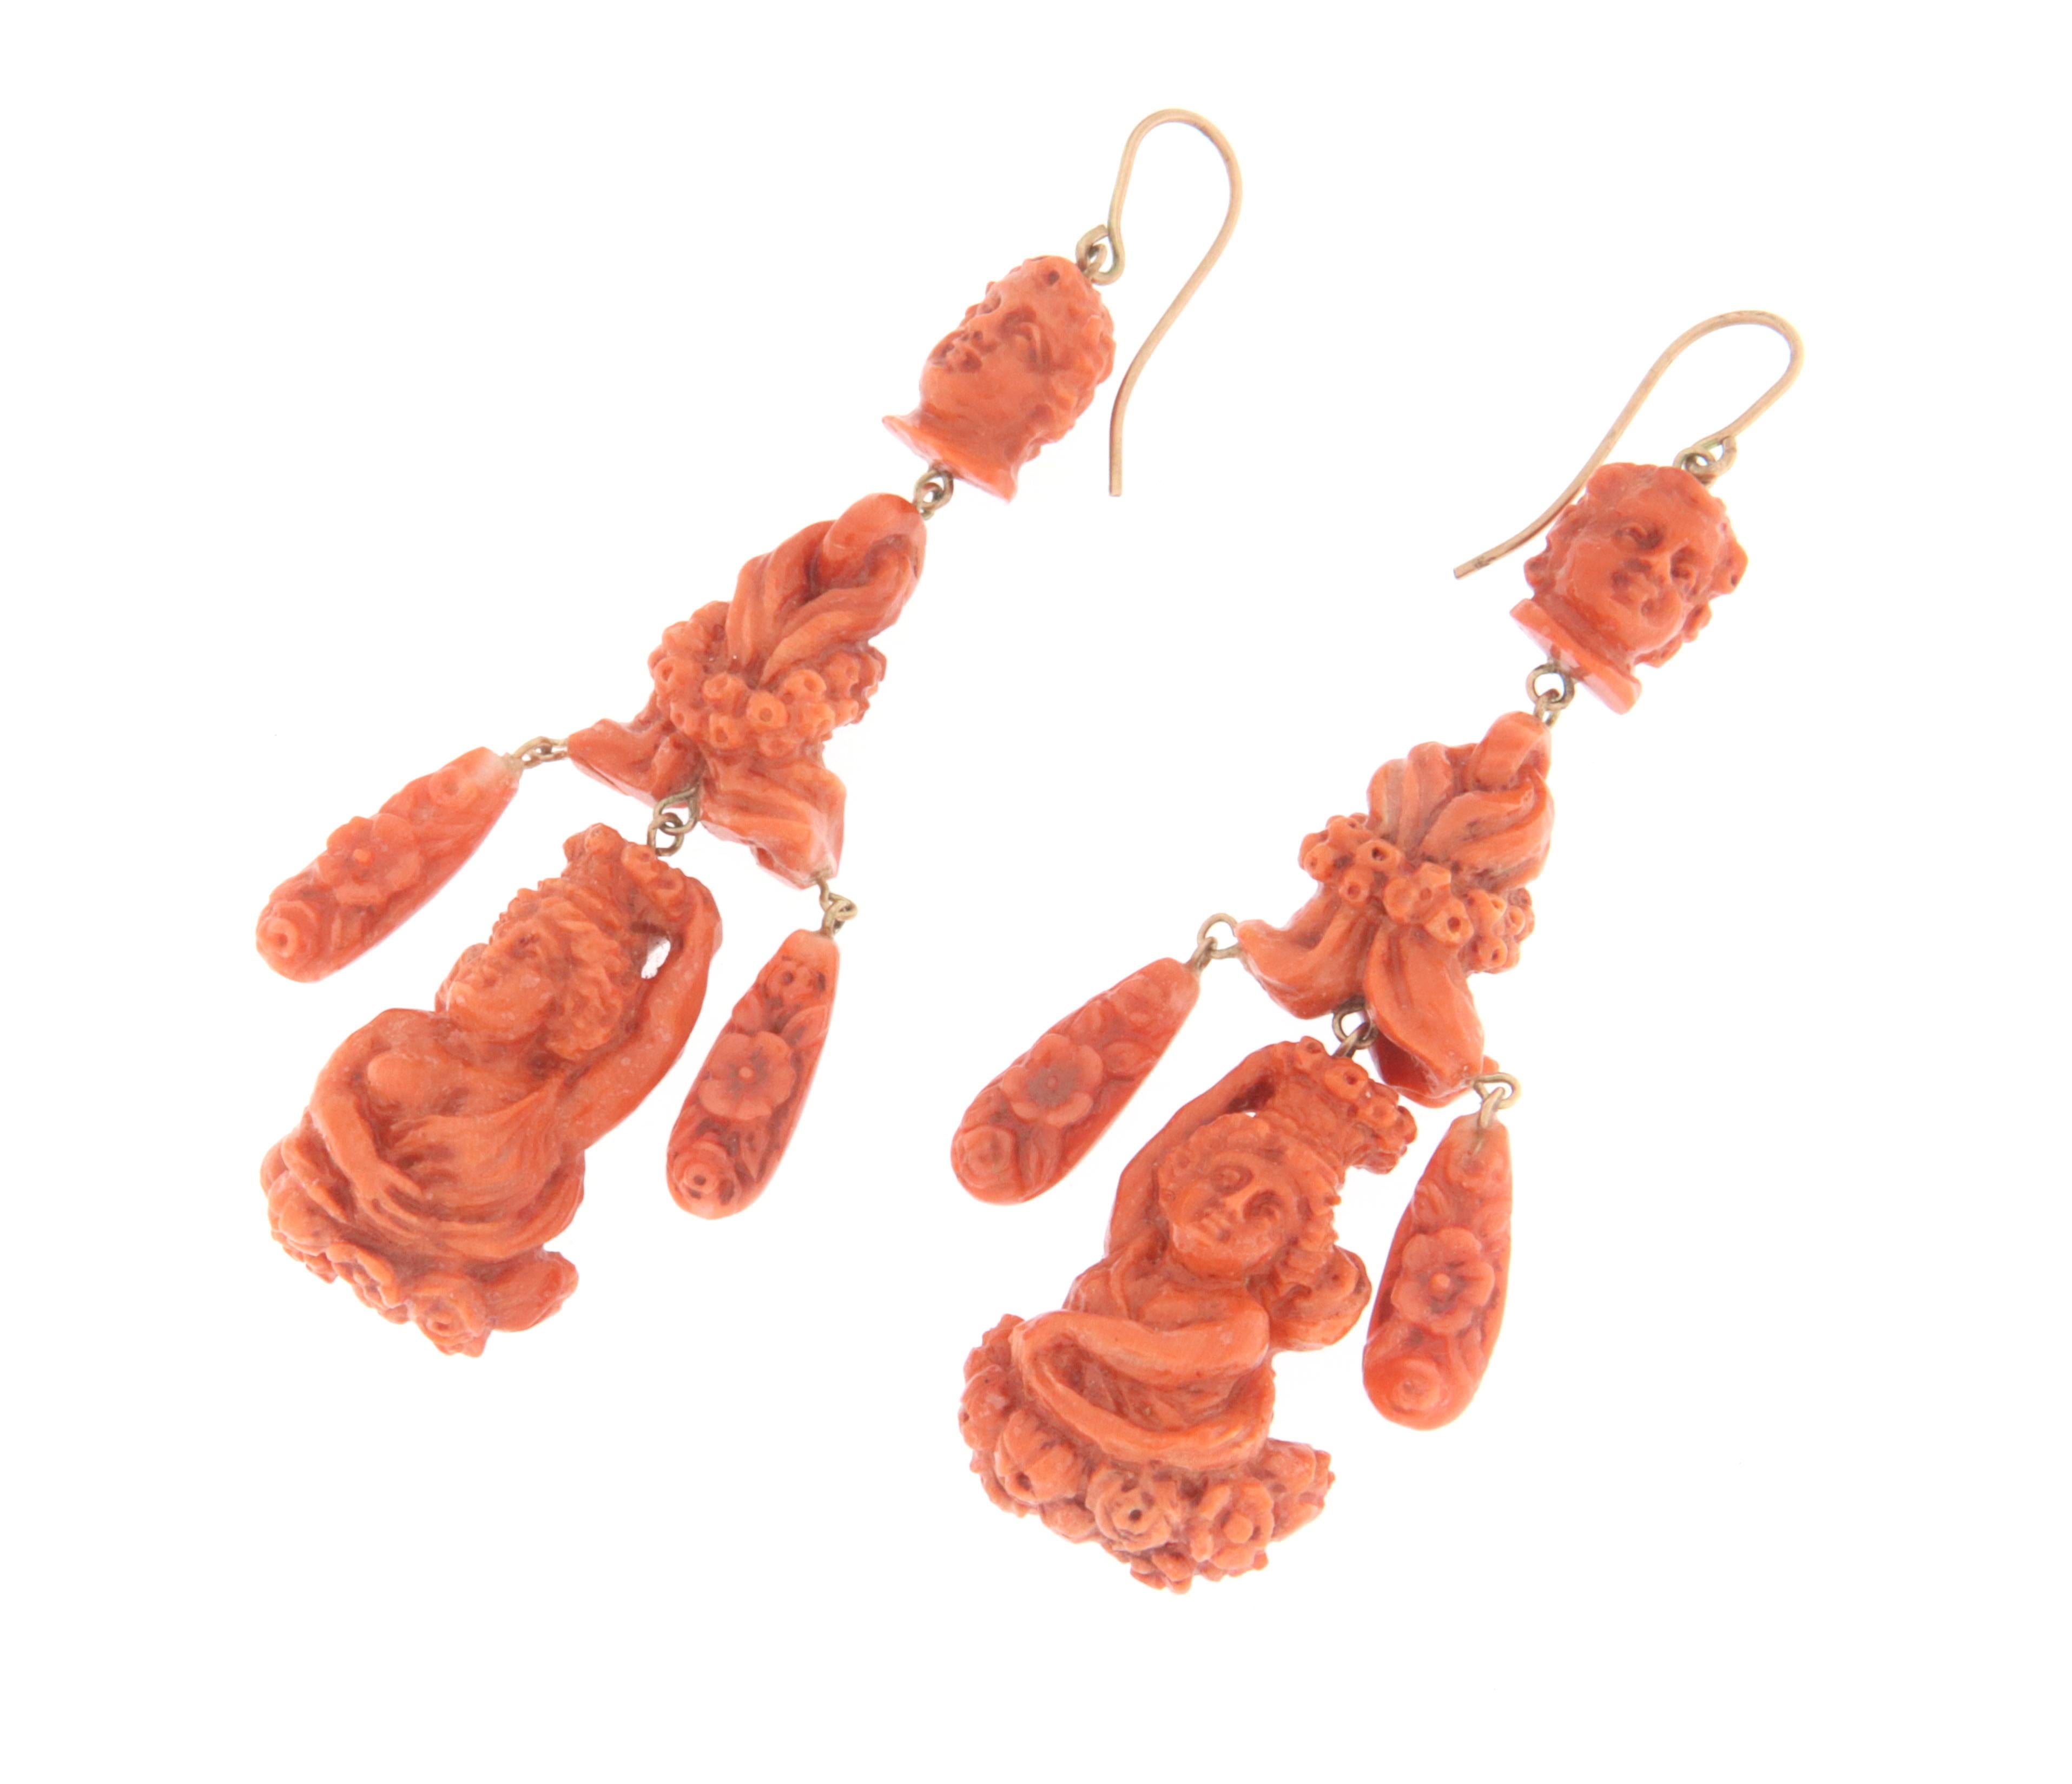 9 karat yellow gold drop earrings. Handmade by our artisans assembled with natural coral

Earrings total weight 28.60 grams
